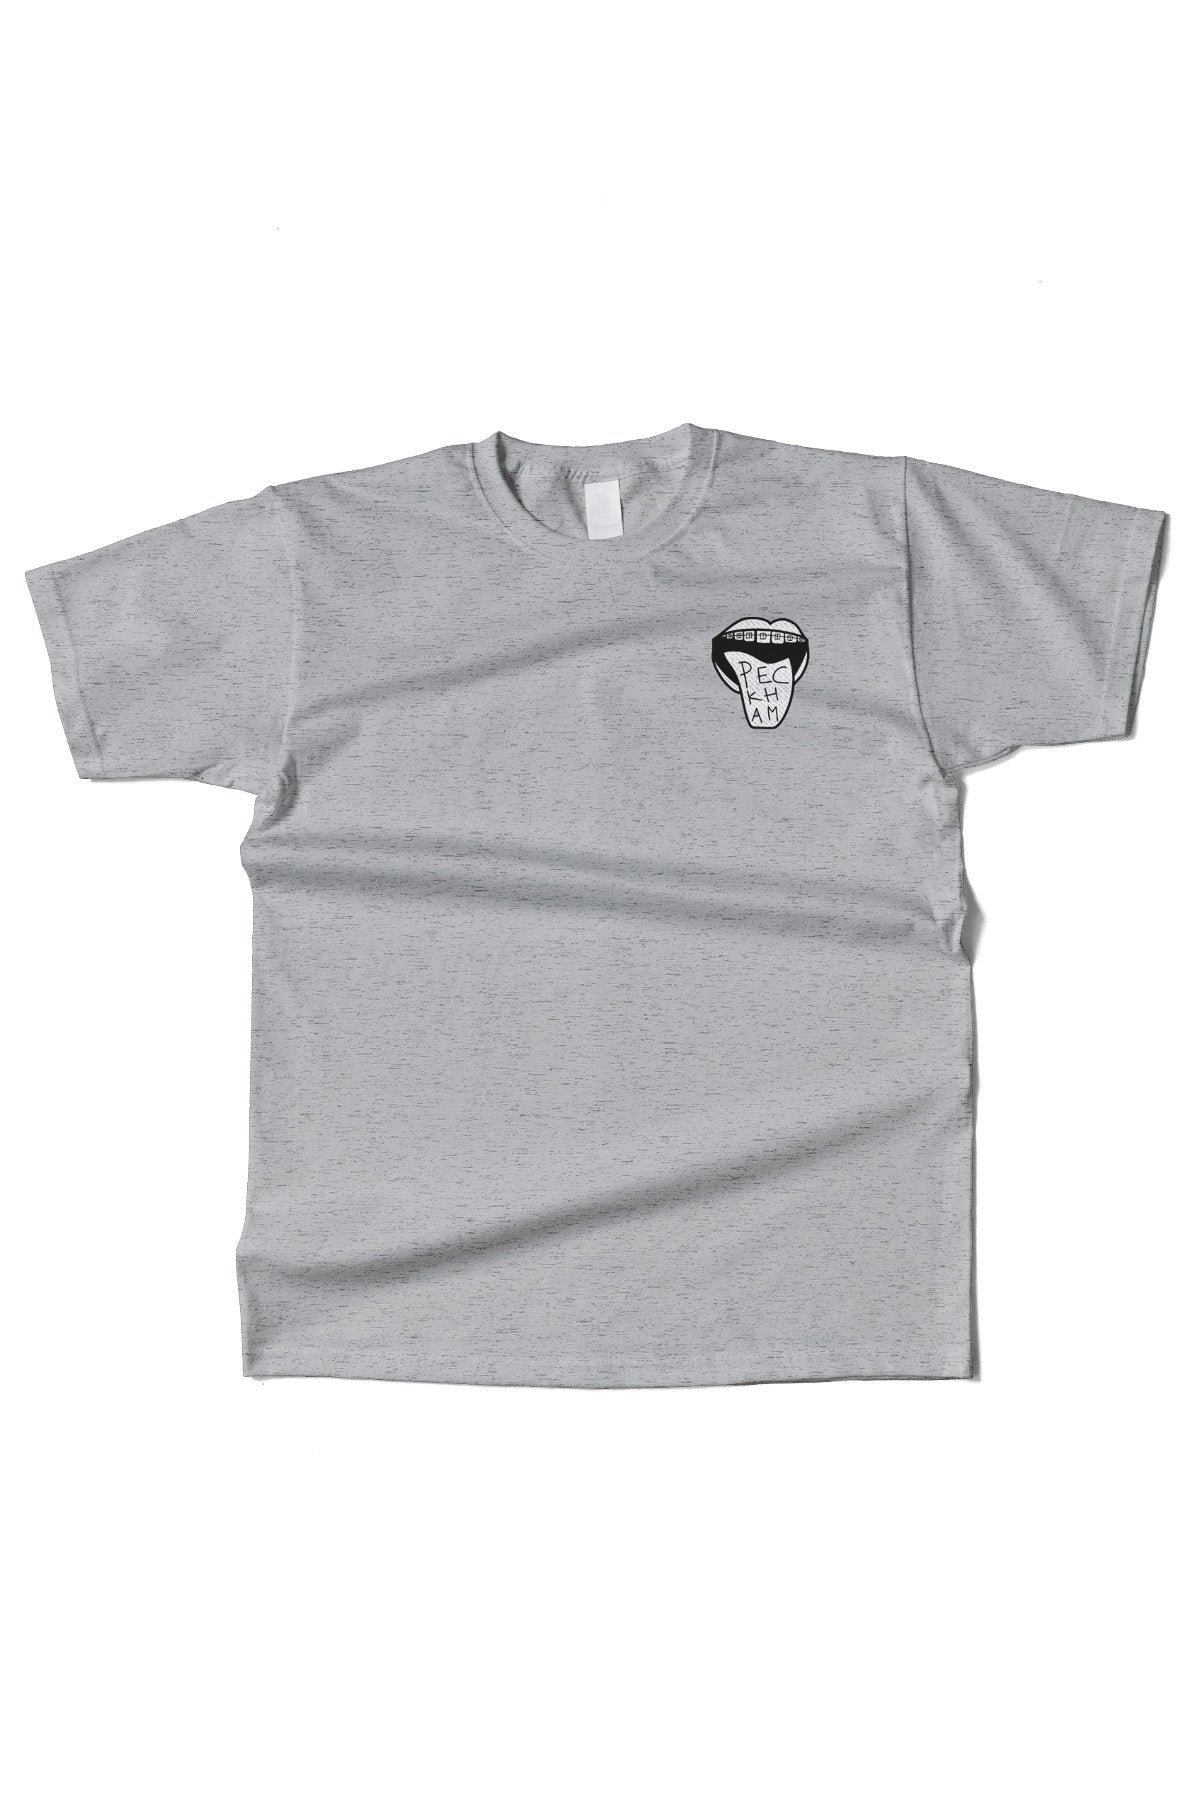 Peckham Mouth Loose Fit Unisex Tee - Grey